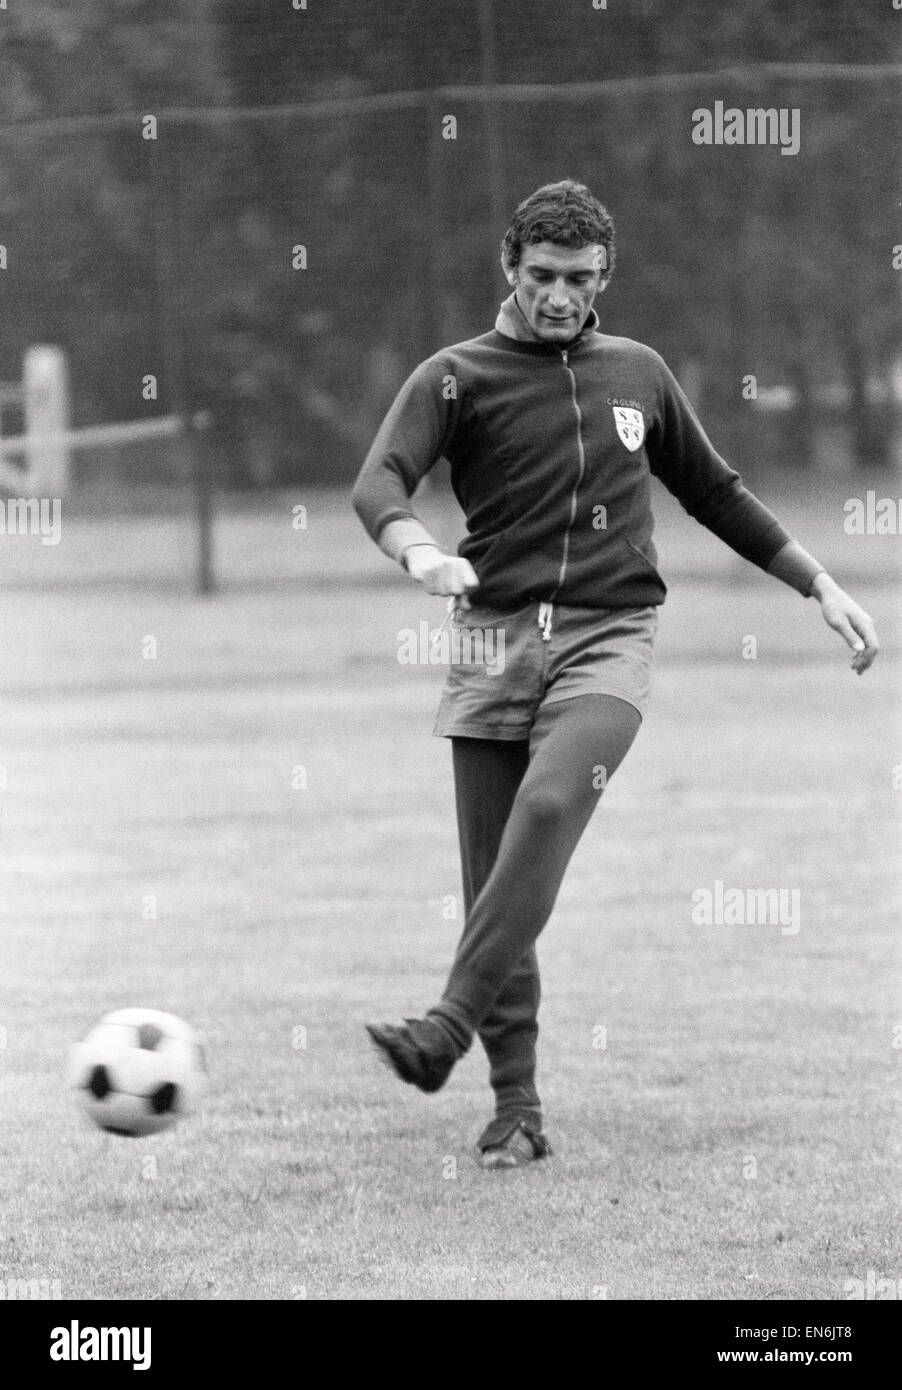 Italian striker Luigi Riva who plays for Sardinian club side Cagliari, pictured during a training session at the Selsdon Park Hotel in Surrey, ahead of his team's match against Crystal Palace in the Anglo-Italian tournament. 25th May 1971. Stock Photo